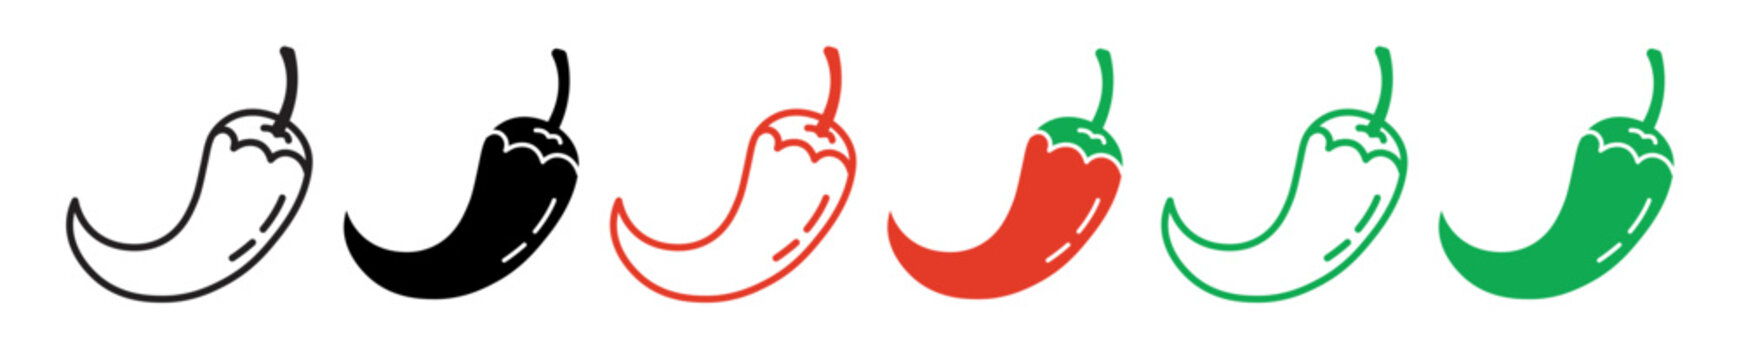 Green and red spicy chili pepper vector icon set. Cayenne peppers symbol